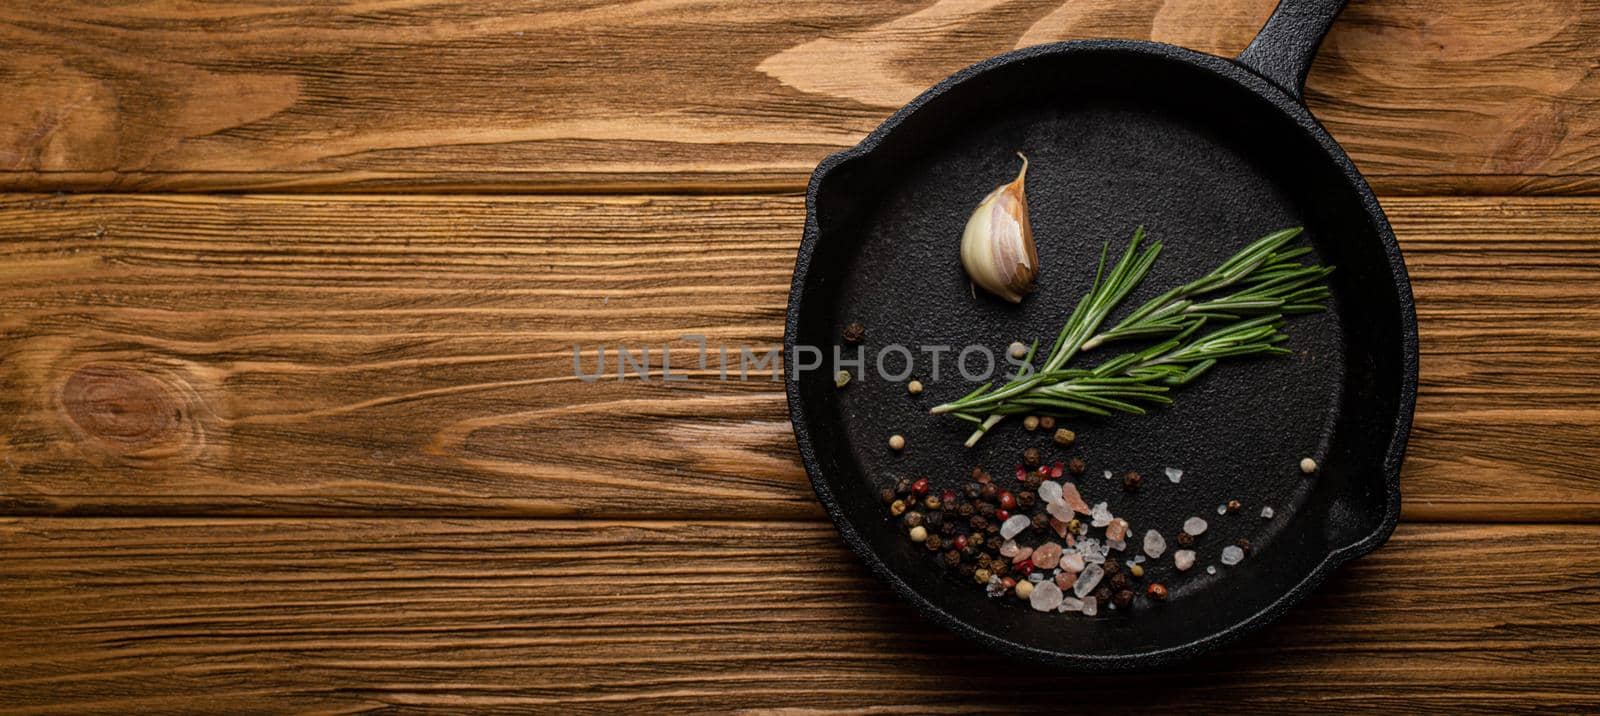 Black cast iron frying pan skillet with food cooking ingredients fresh rosemary, garlic, salt and pepper by its_al_dente